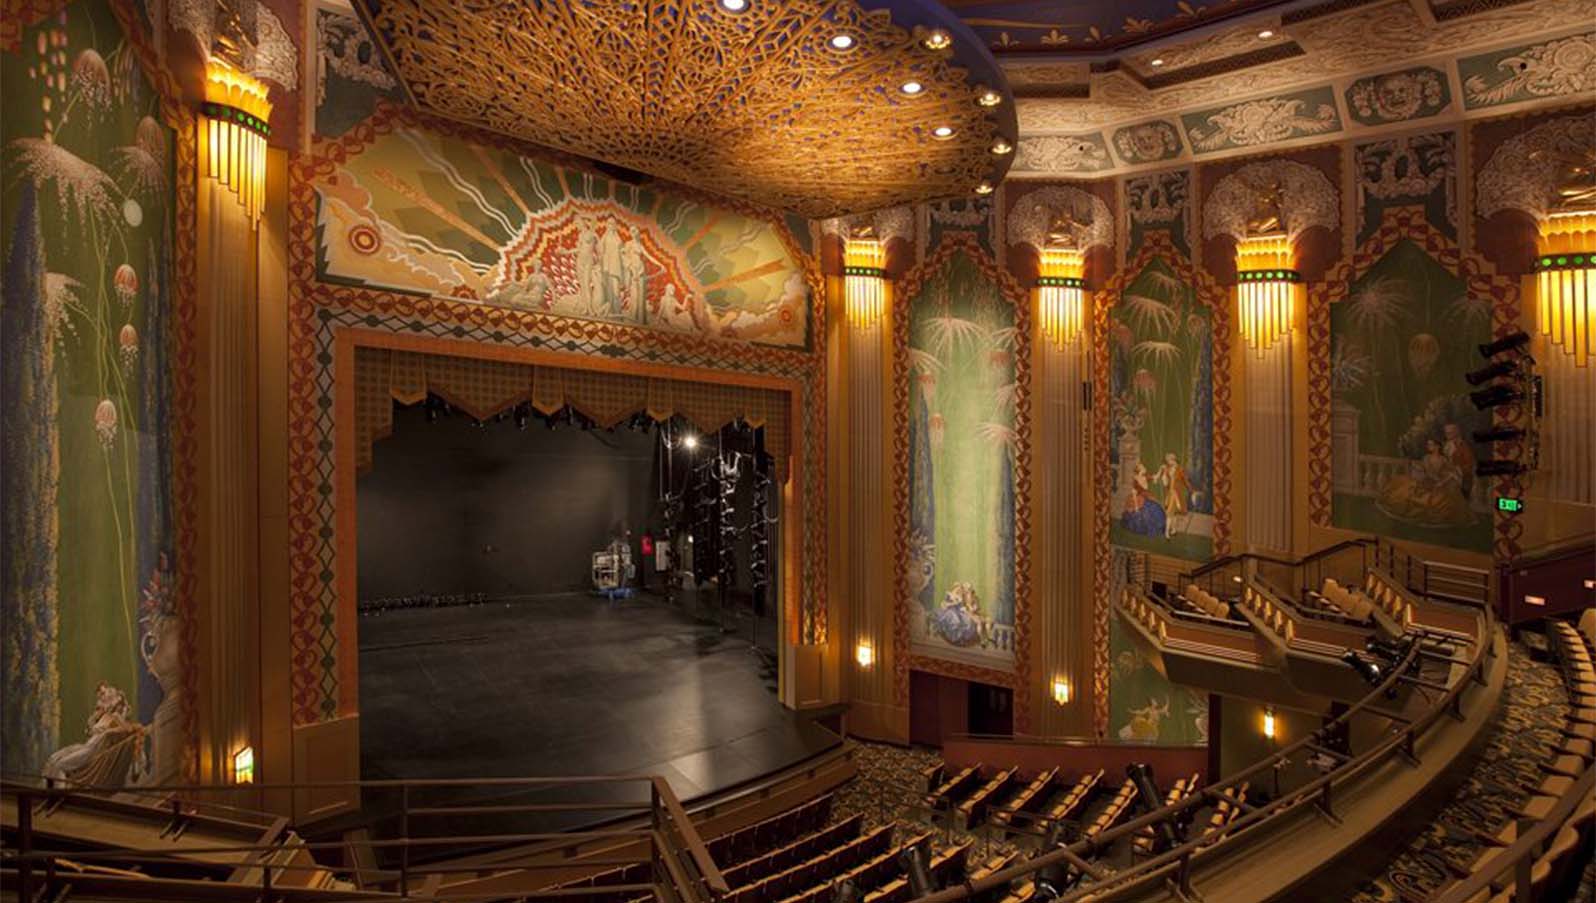 Paramount Center Theater, art murals decorate the walls and ceilings